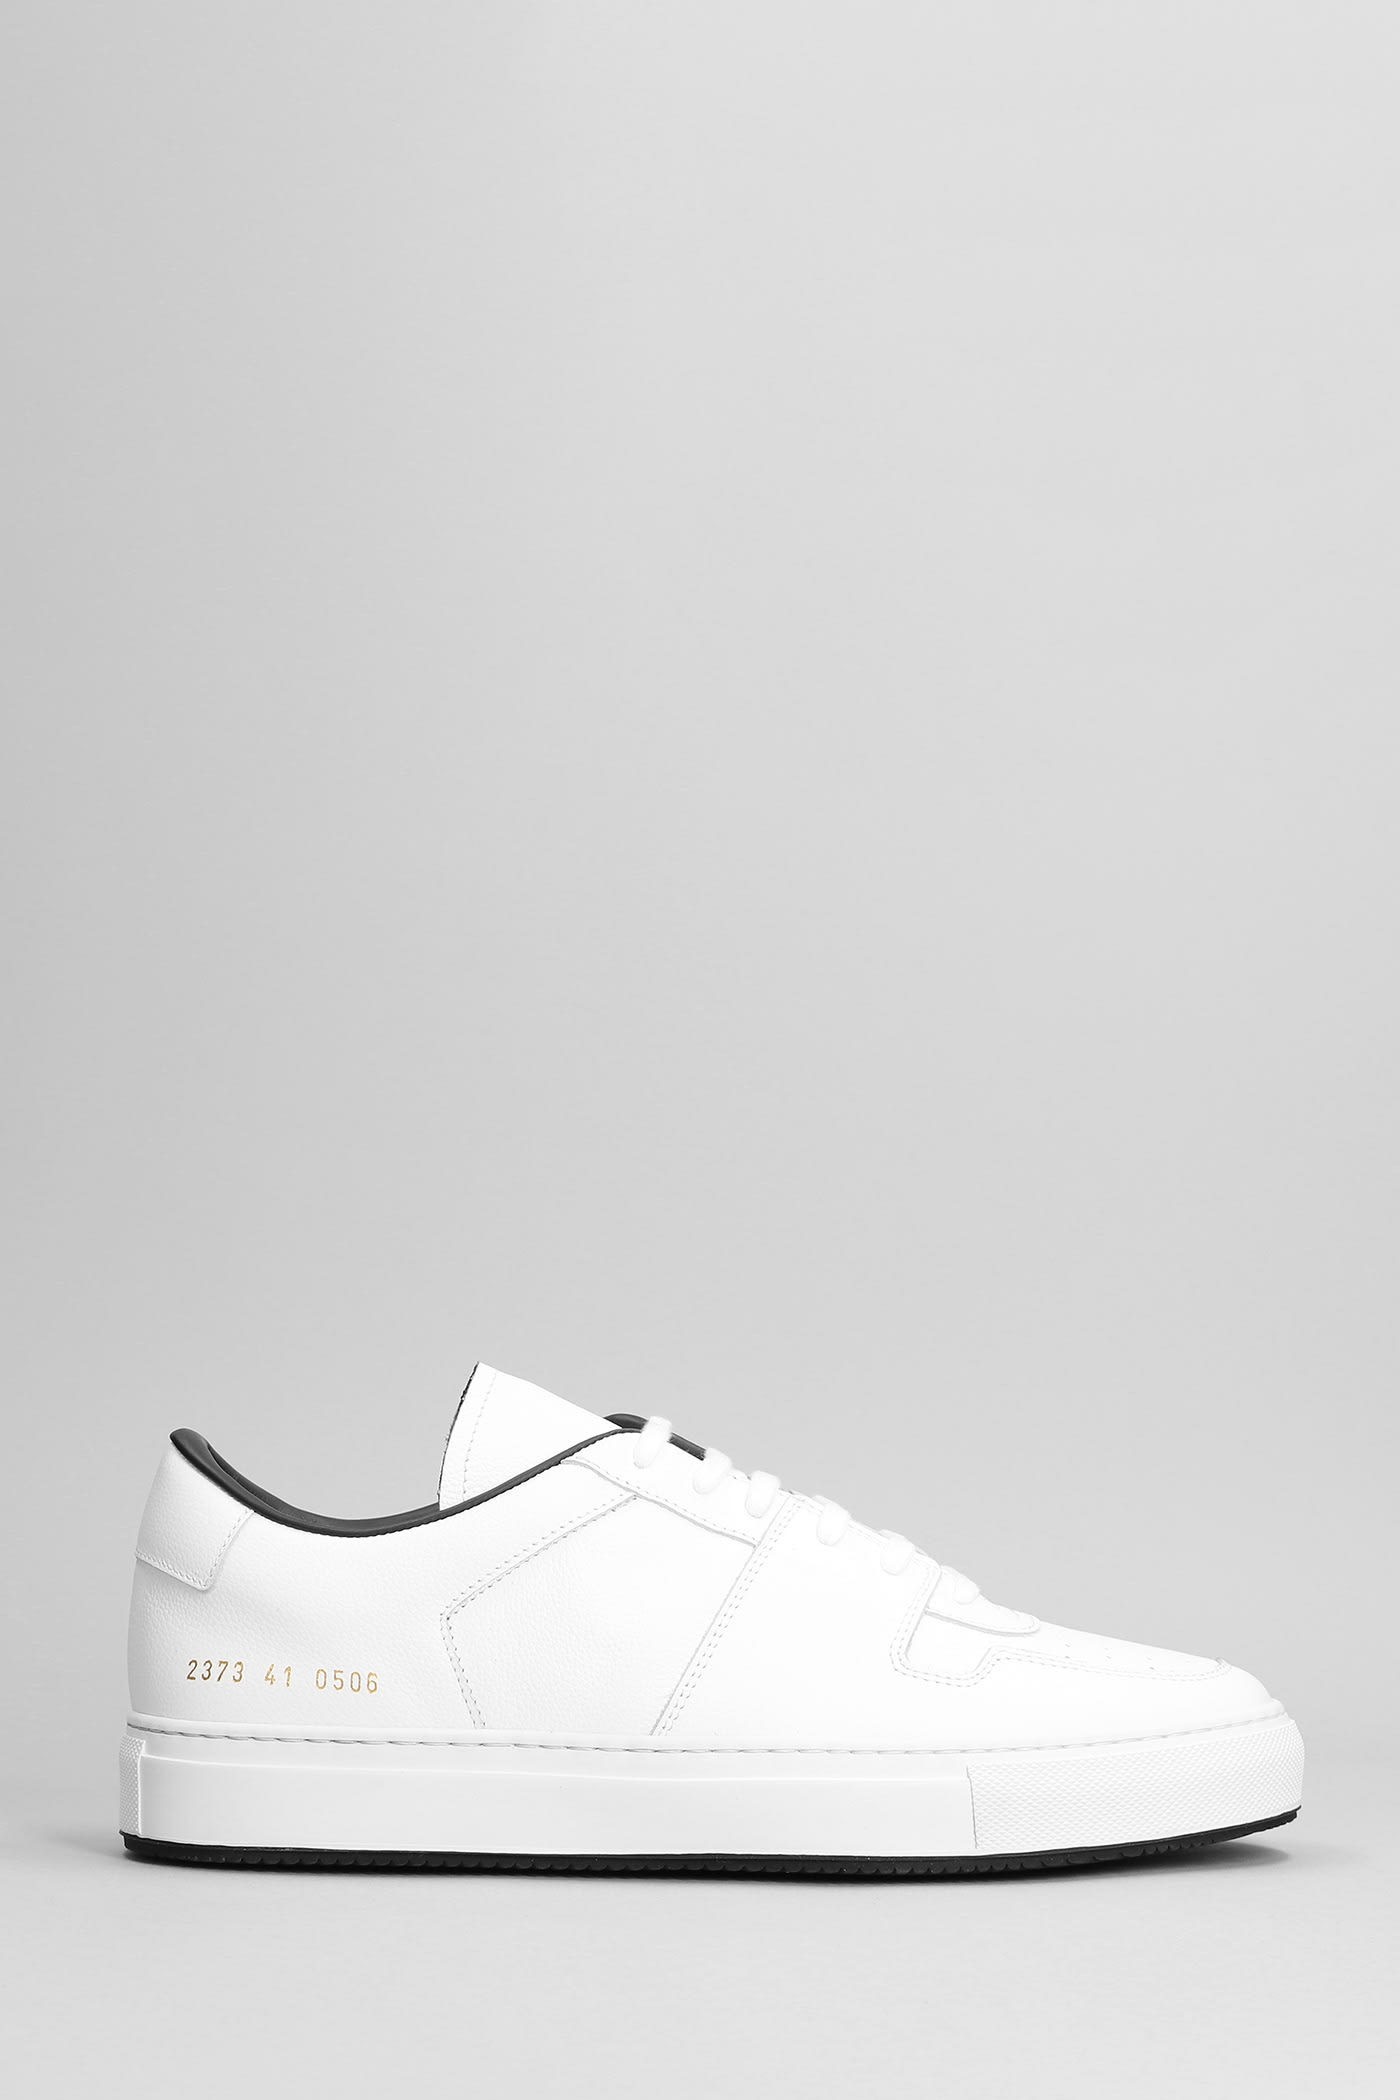 COMMON PROJECTS DECADES SNEAKERS IN WHITE LEATHER